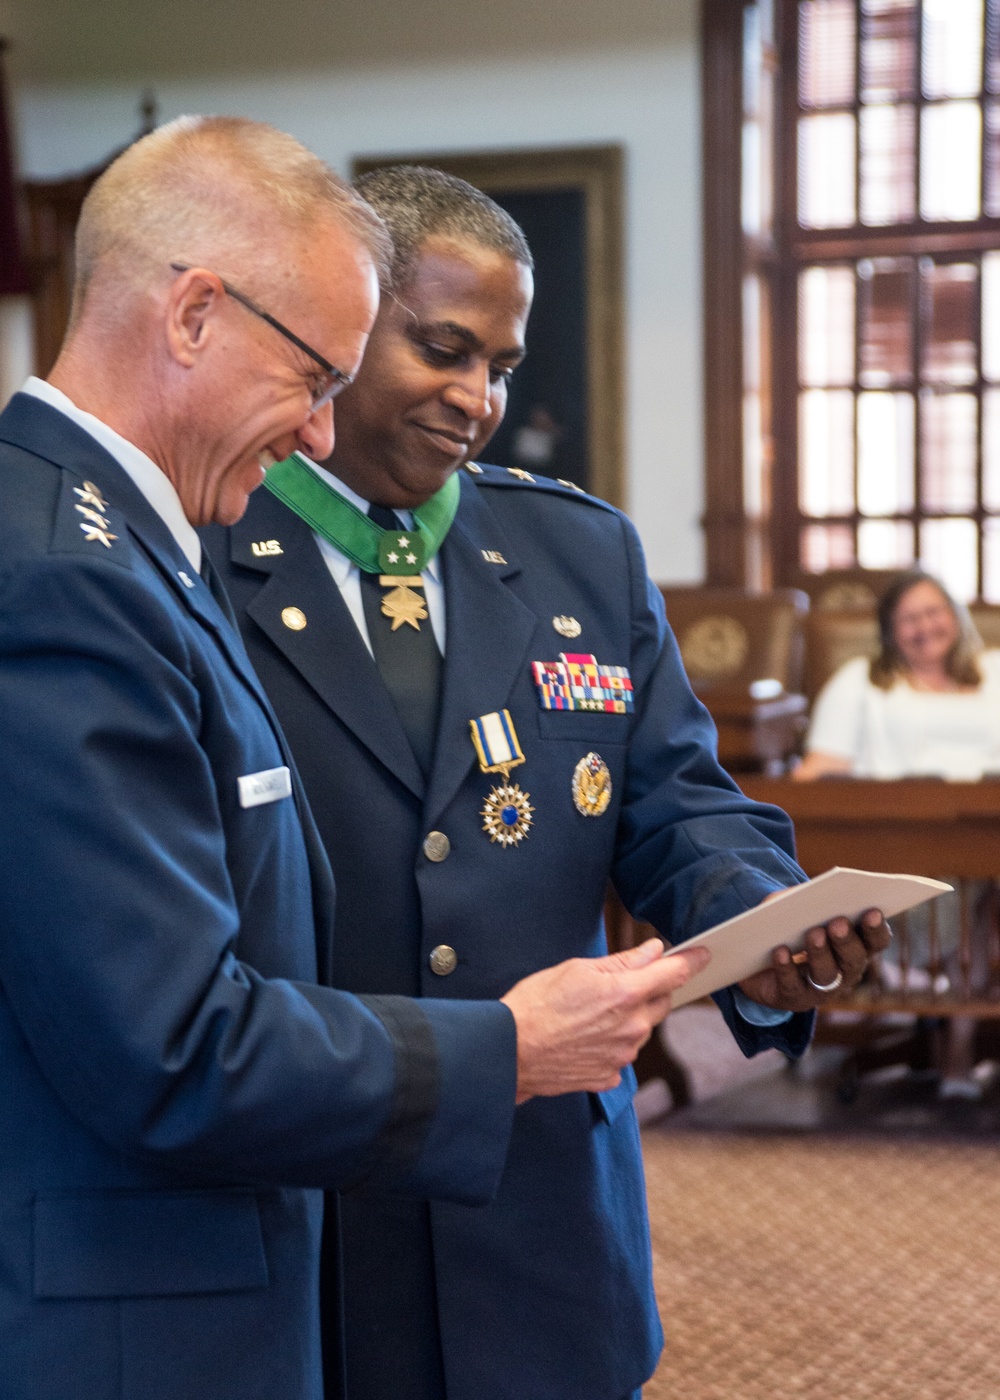 Maj. Gen. Newby Retires after 35 years